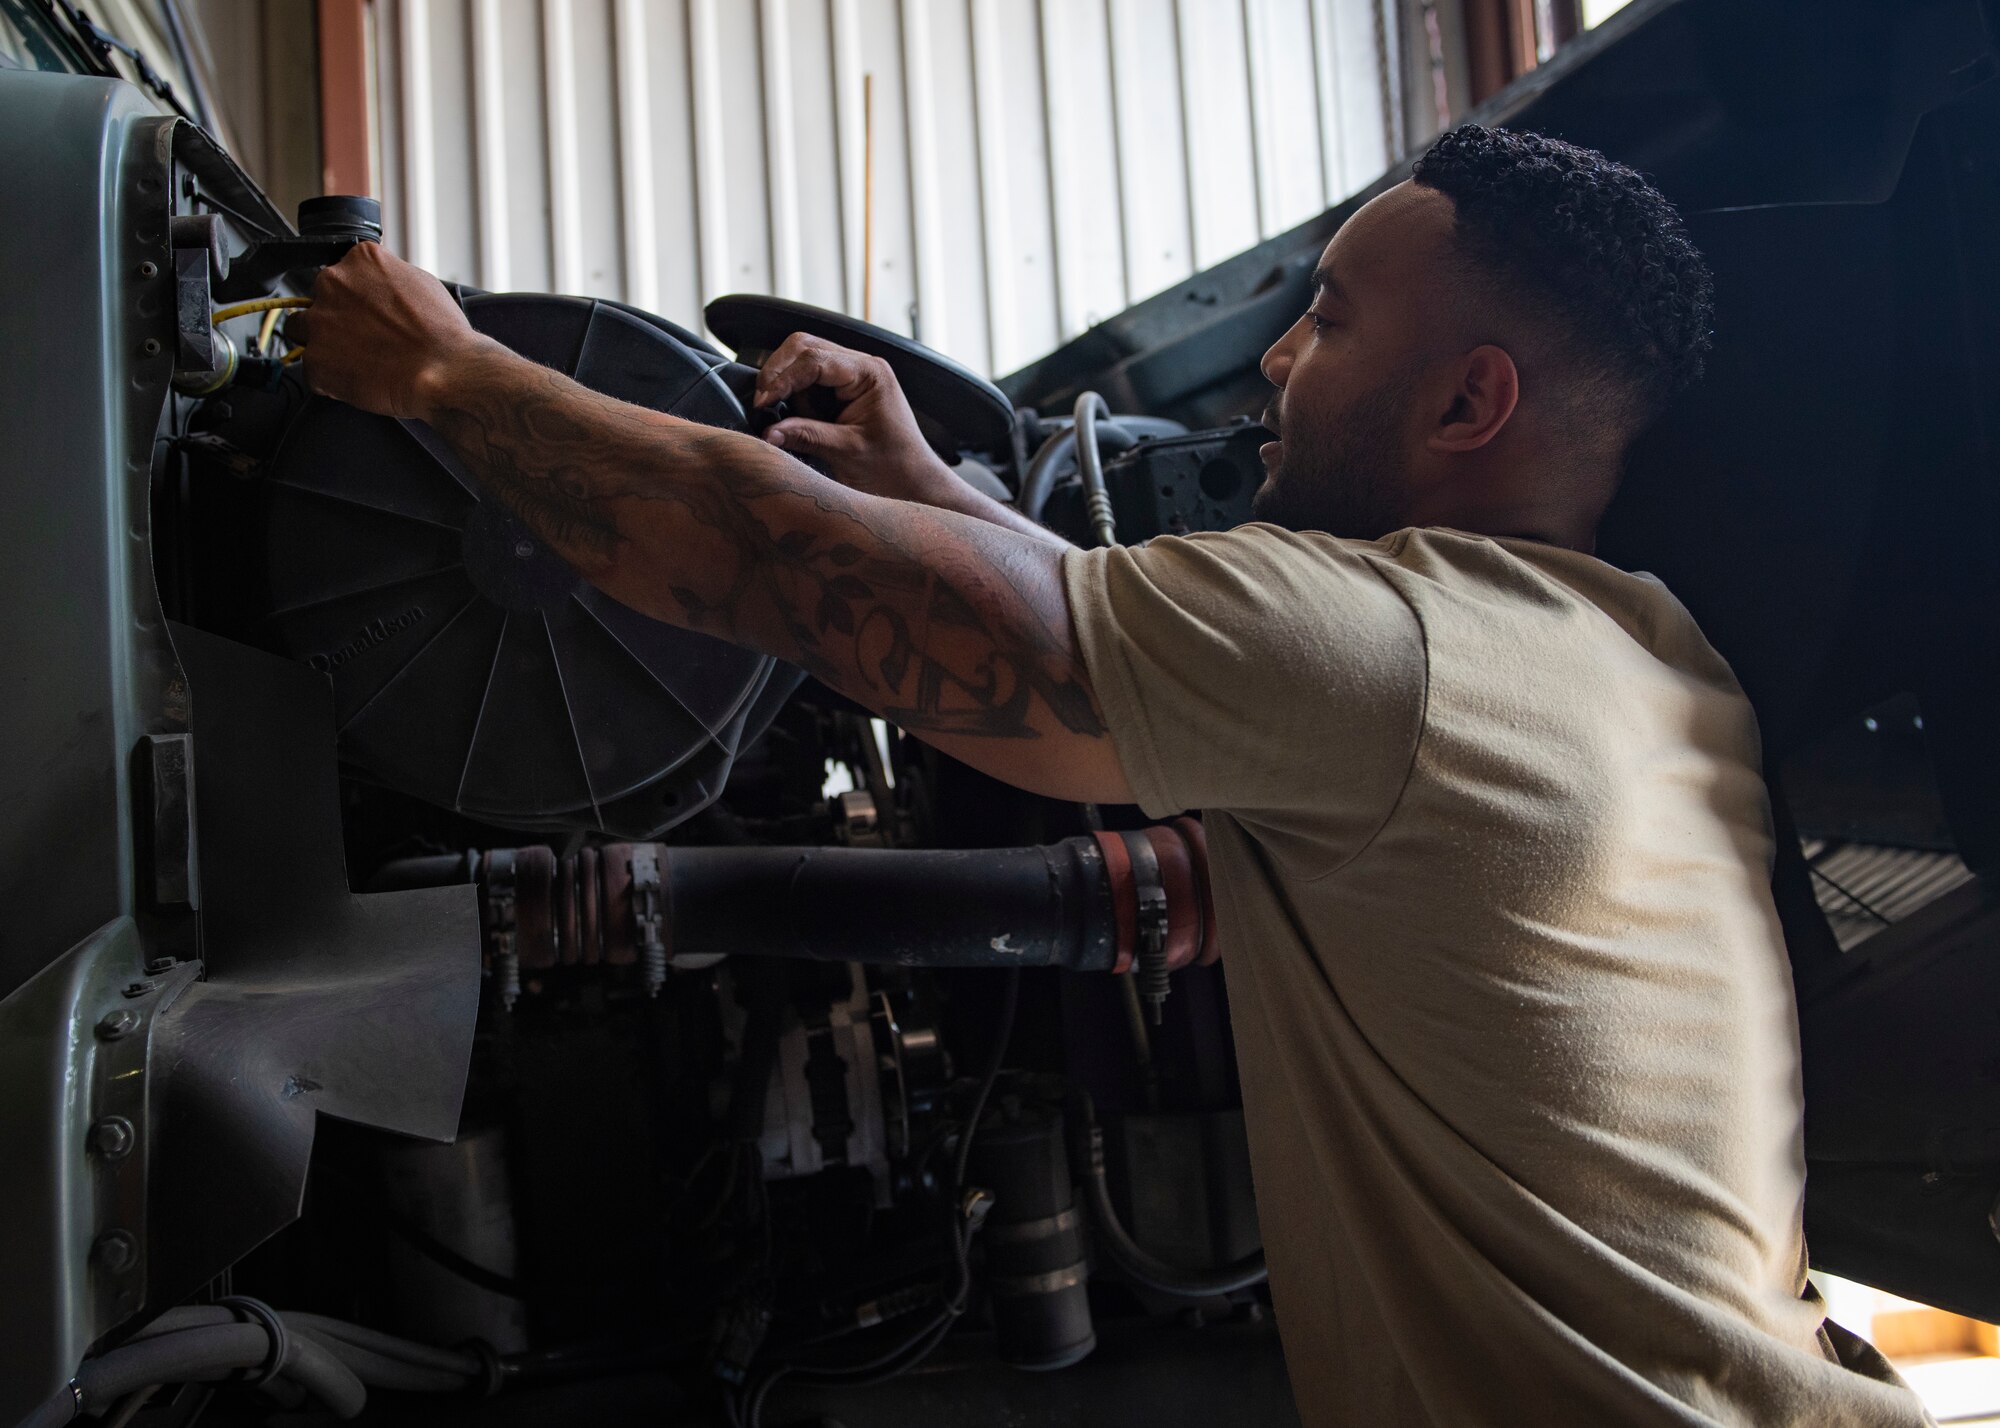 U.S. Air Force Staff Sgt. Akeem Anderson, vehicle mechanic assigned temporarily assigned to the 325th Logistics Readiness Squadron, performs preventative maintenance on a refueling truck June 4, 2019, at Tyndall Air Force Base, Florida.